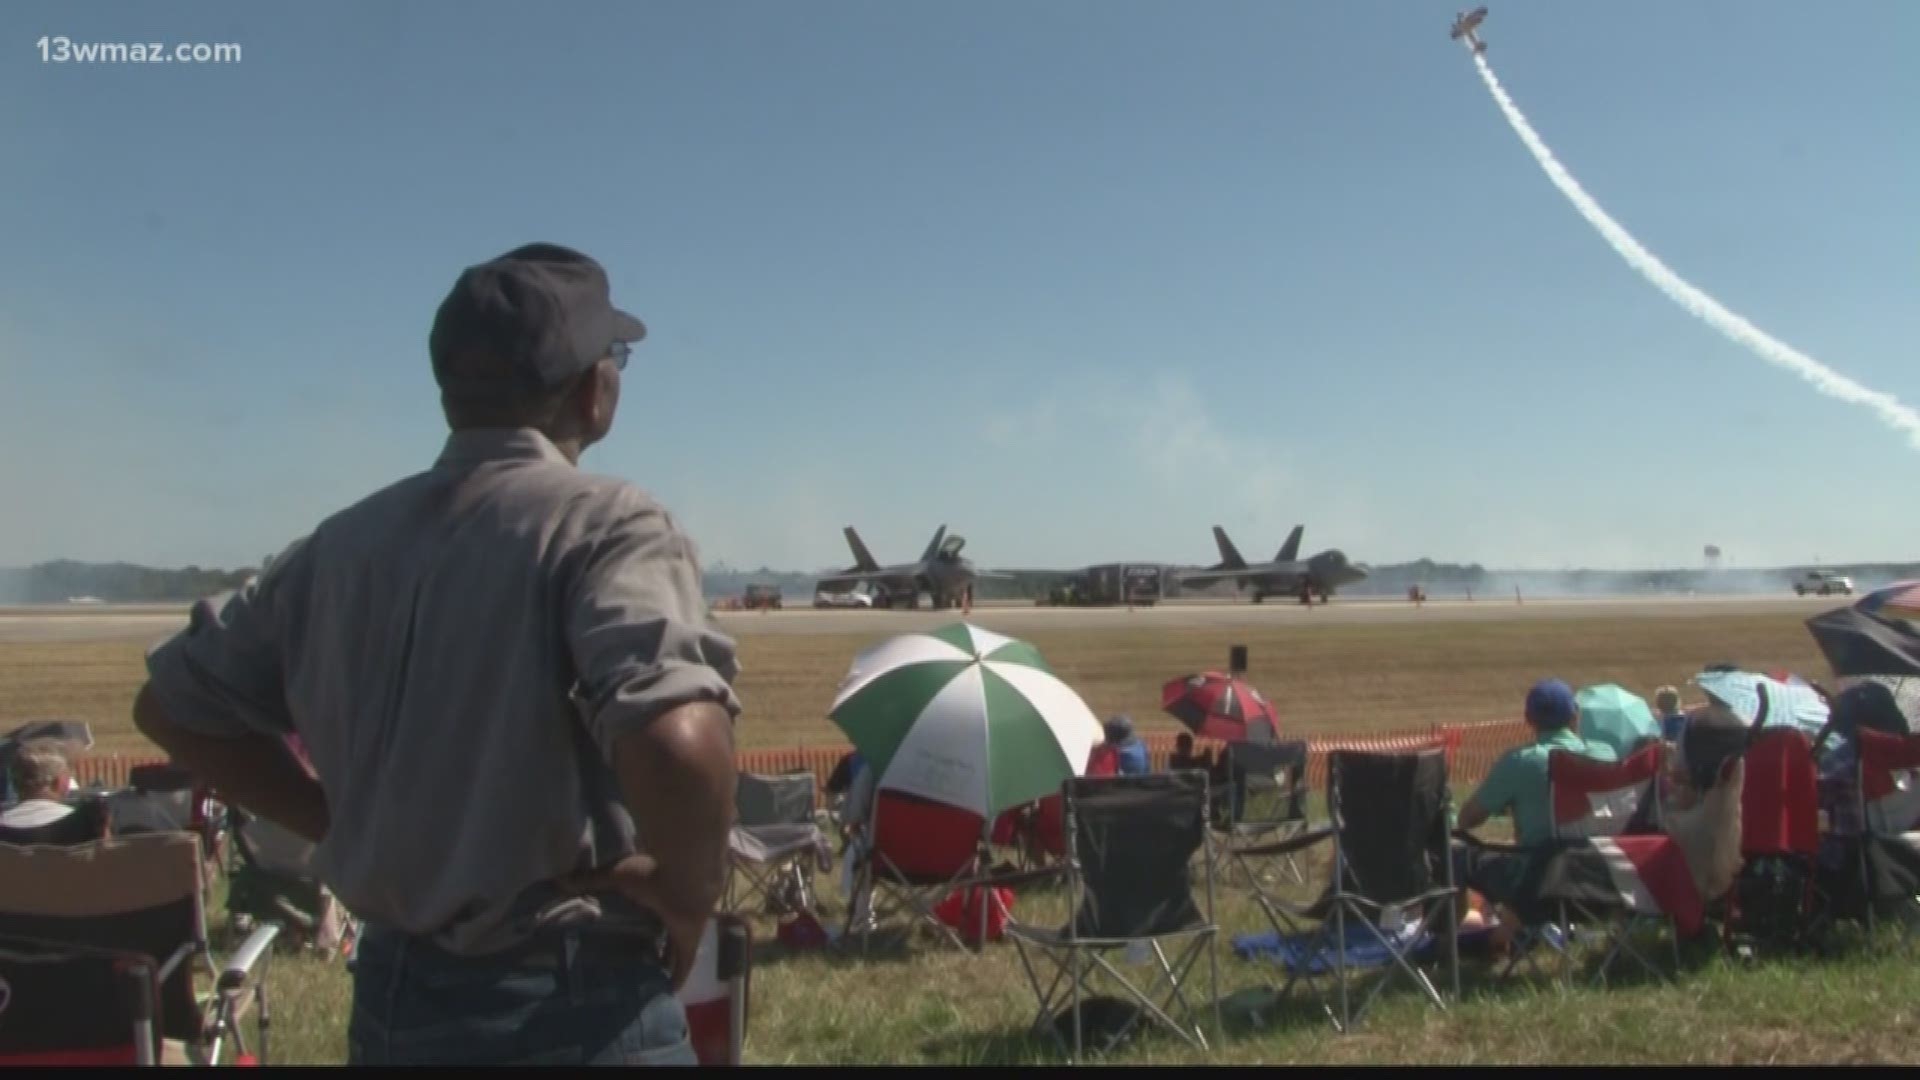 On day two of the Robins Air Show, some folks took extra steps to beat the heat on Robins Air Force Base. Here's how one family stayed protected.